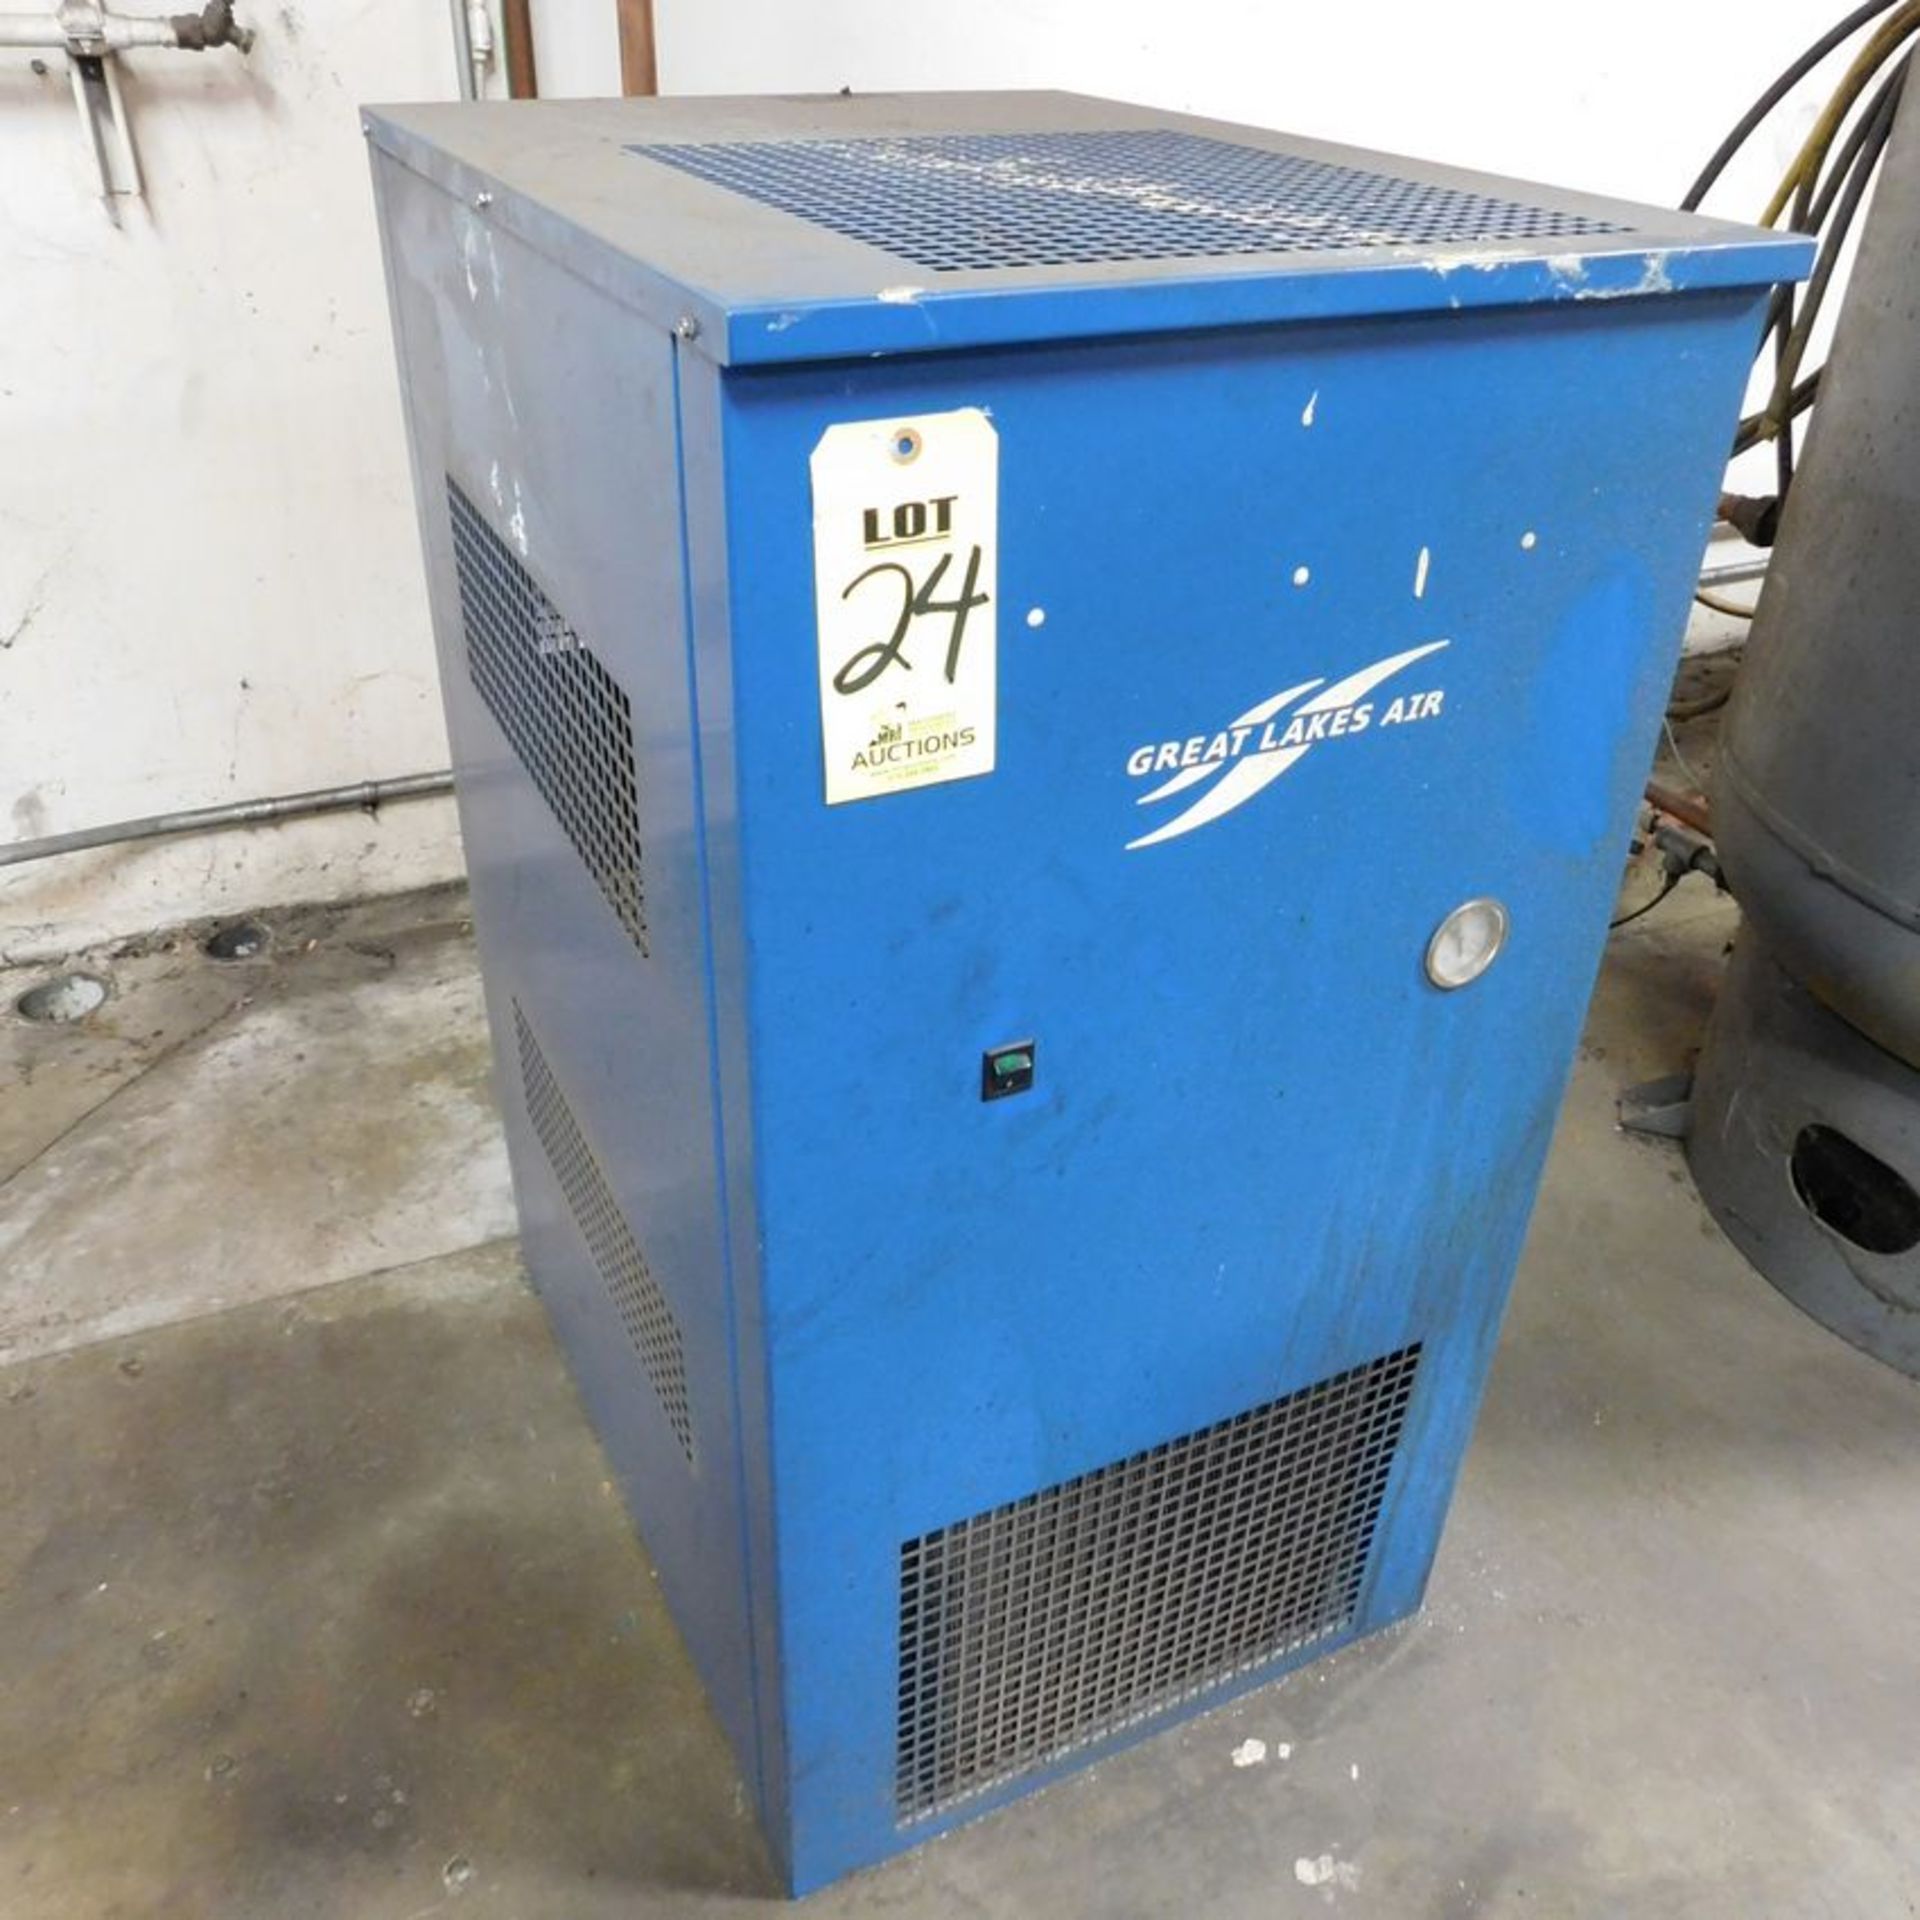 GREAT LAKE AIR DRYER (ADVANCED RIGGERS & MILLWRIGHTS LOADING FEE: $150)